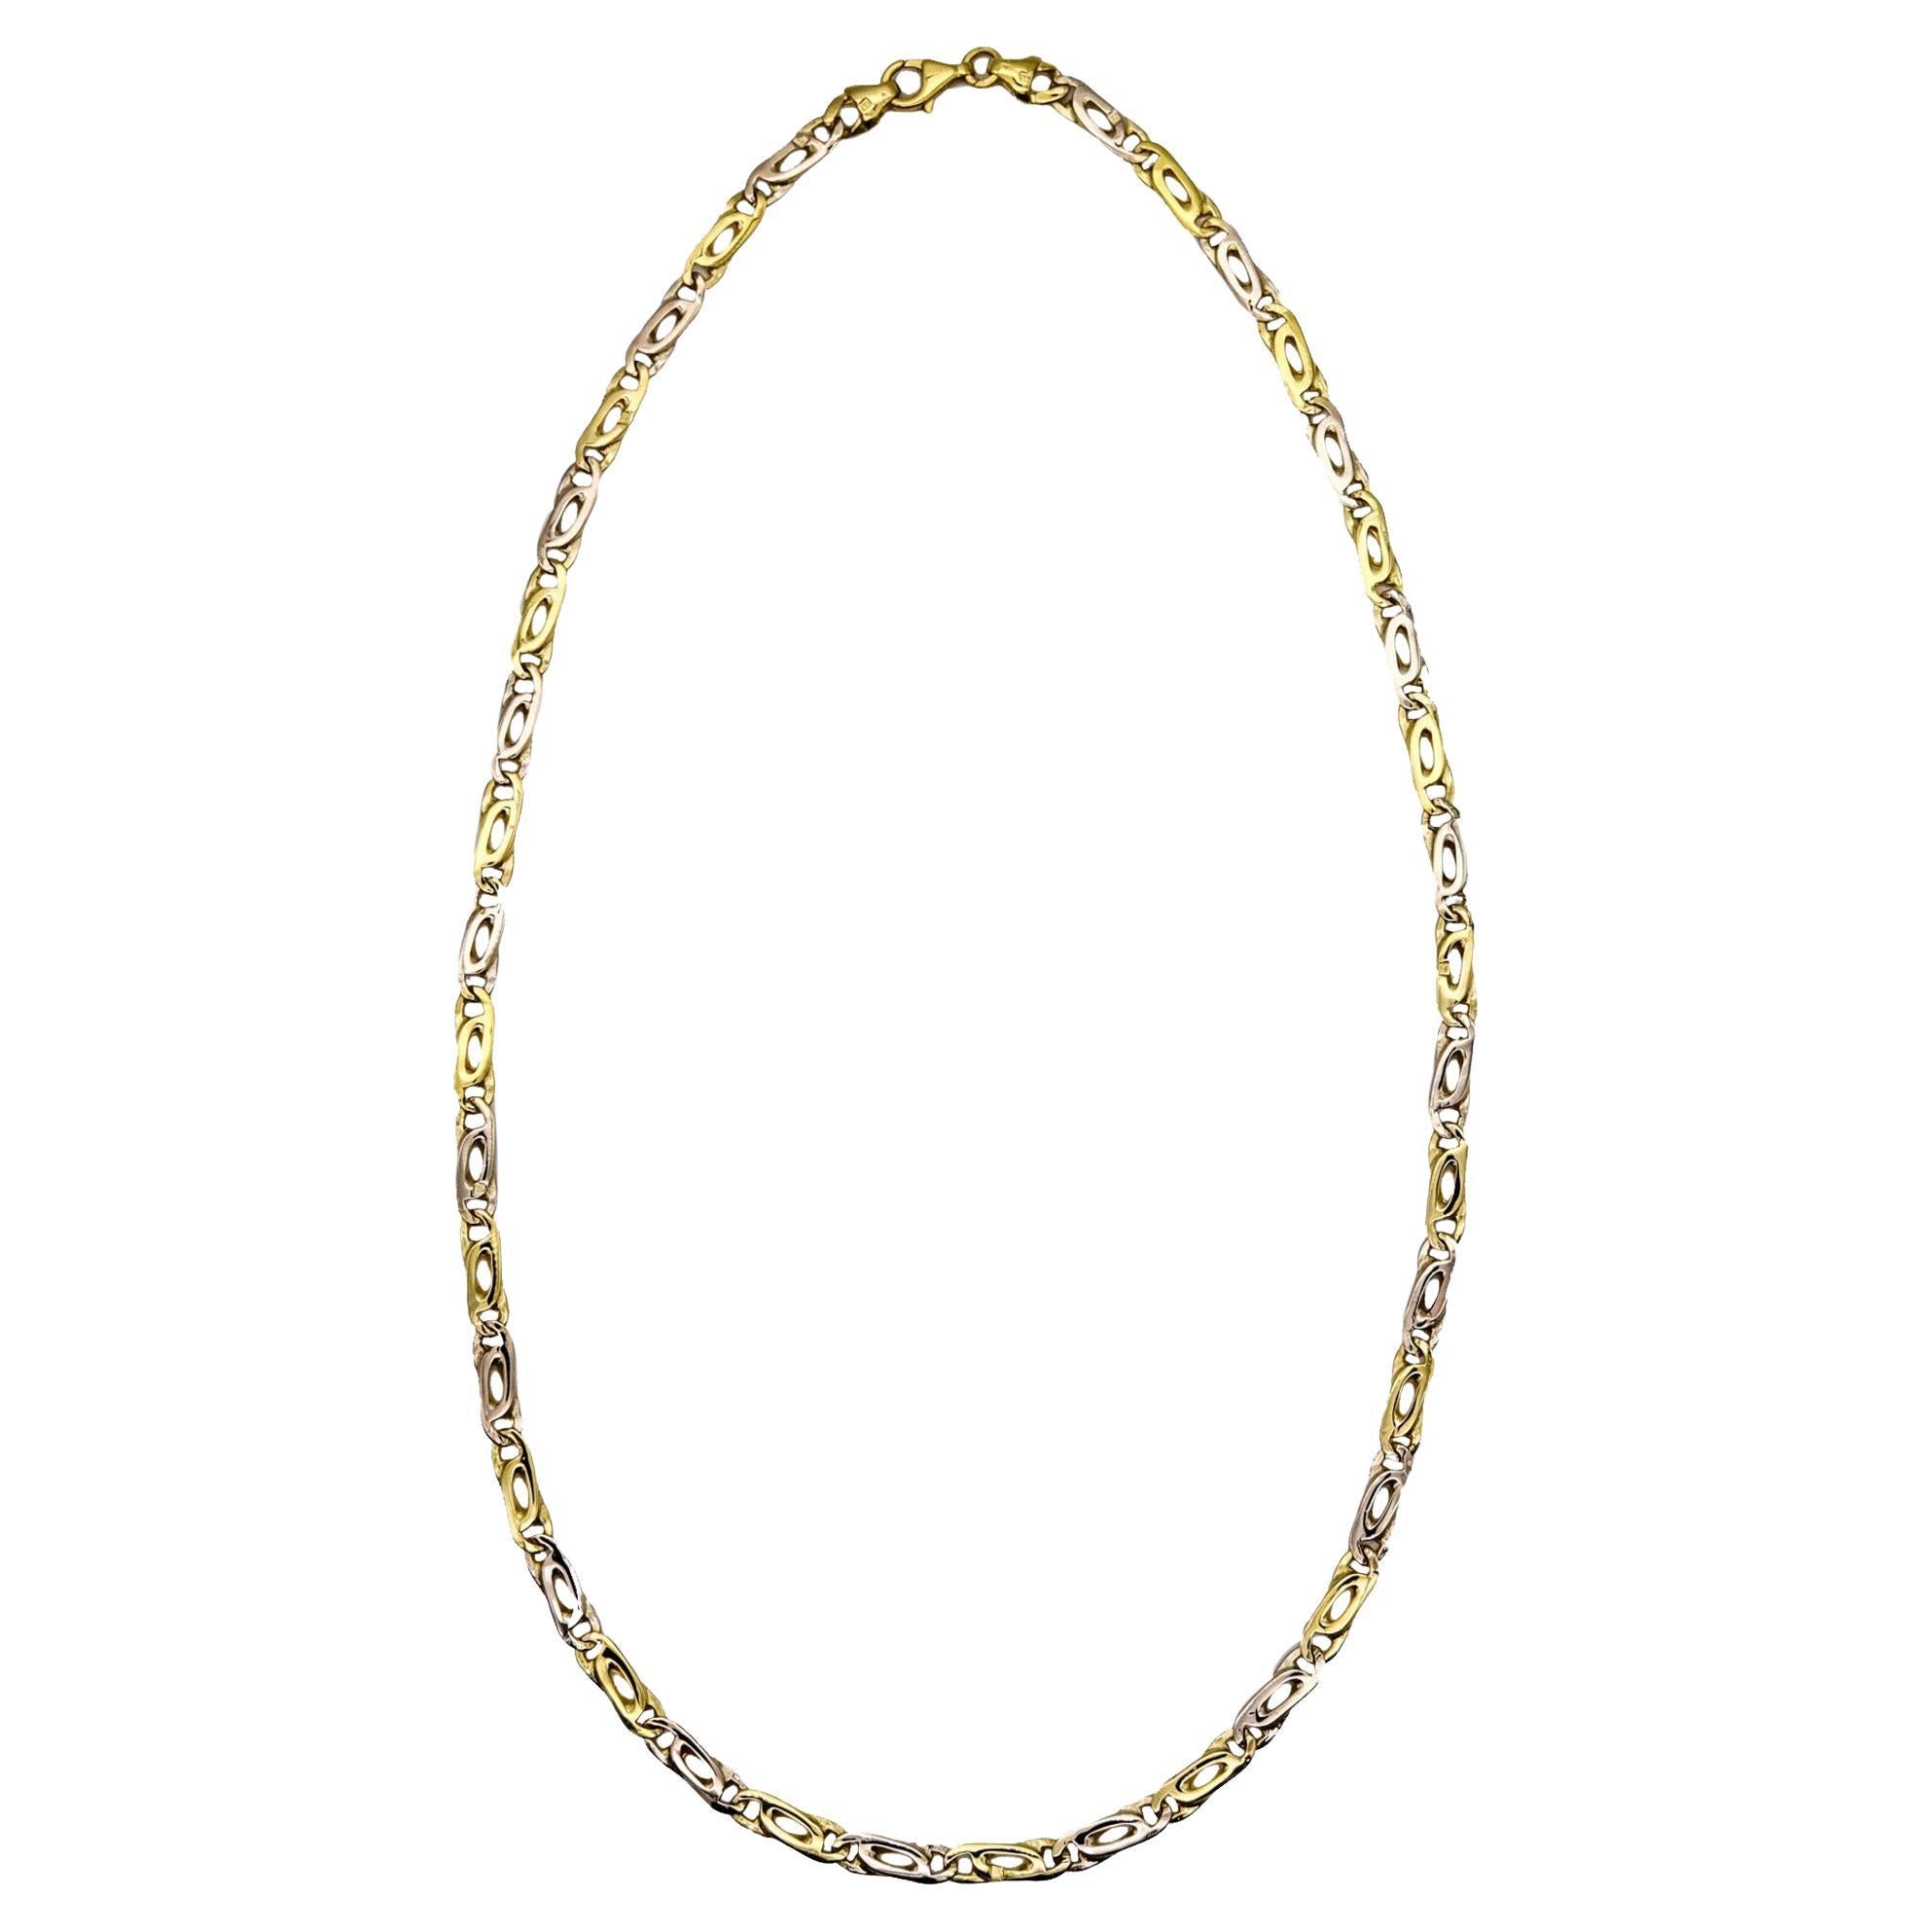 Italian Modernist Two Tones Links Chain in Solid 18Kt White And Yellow Gold